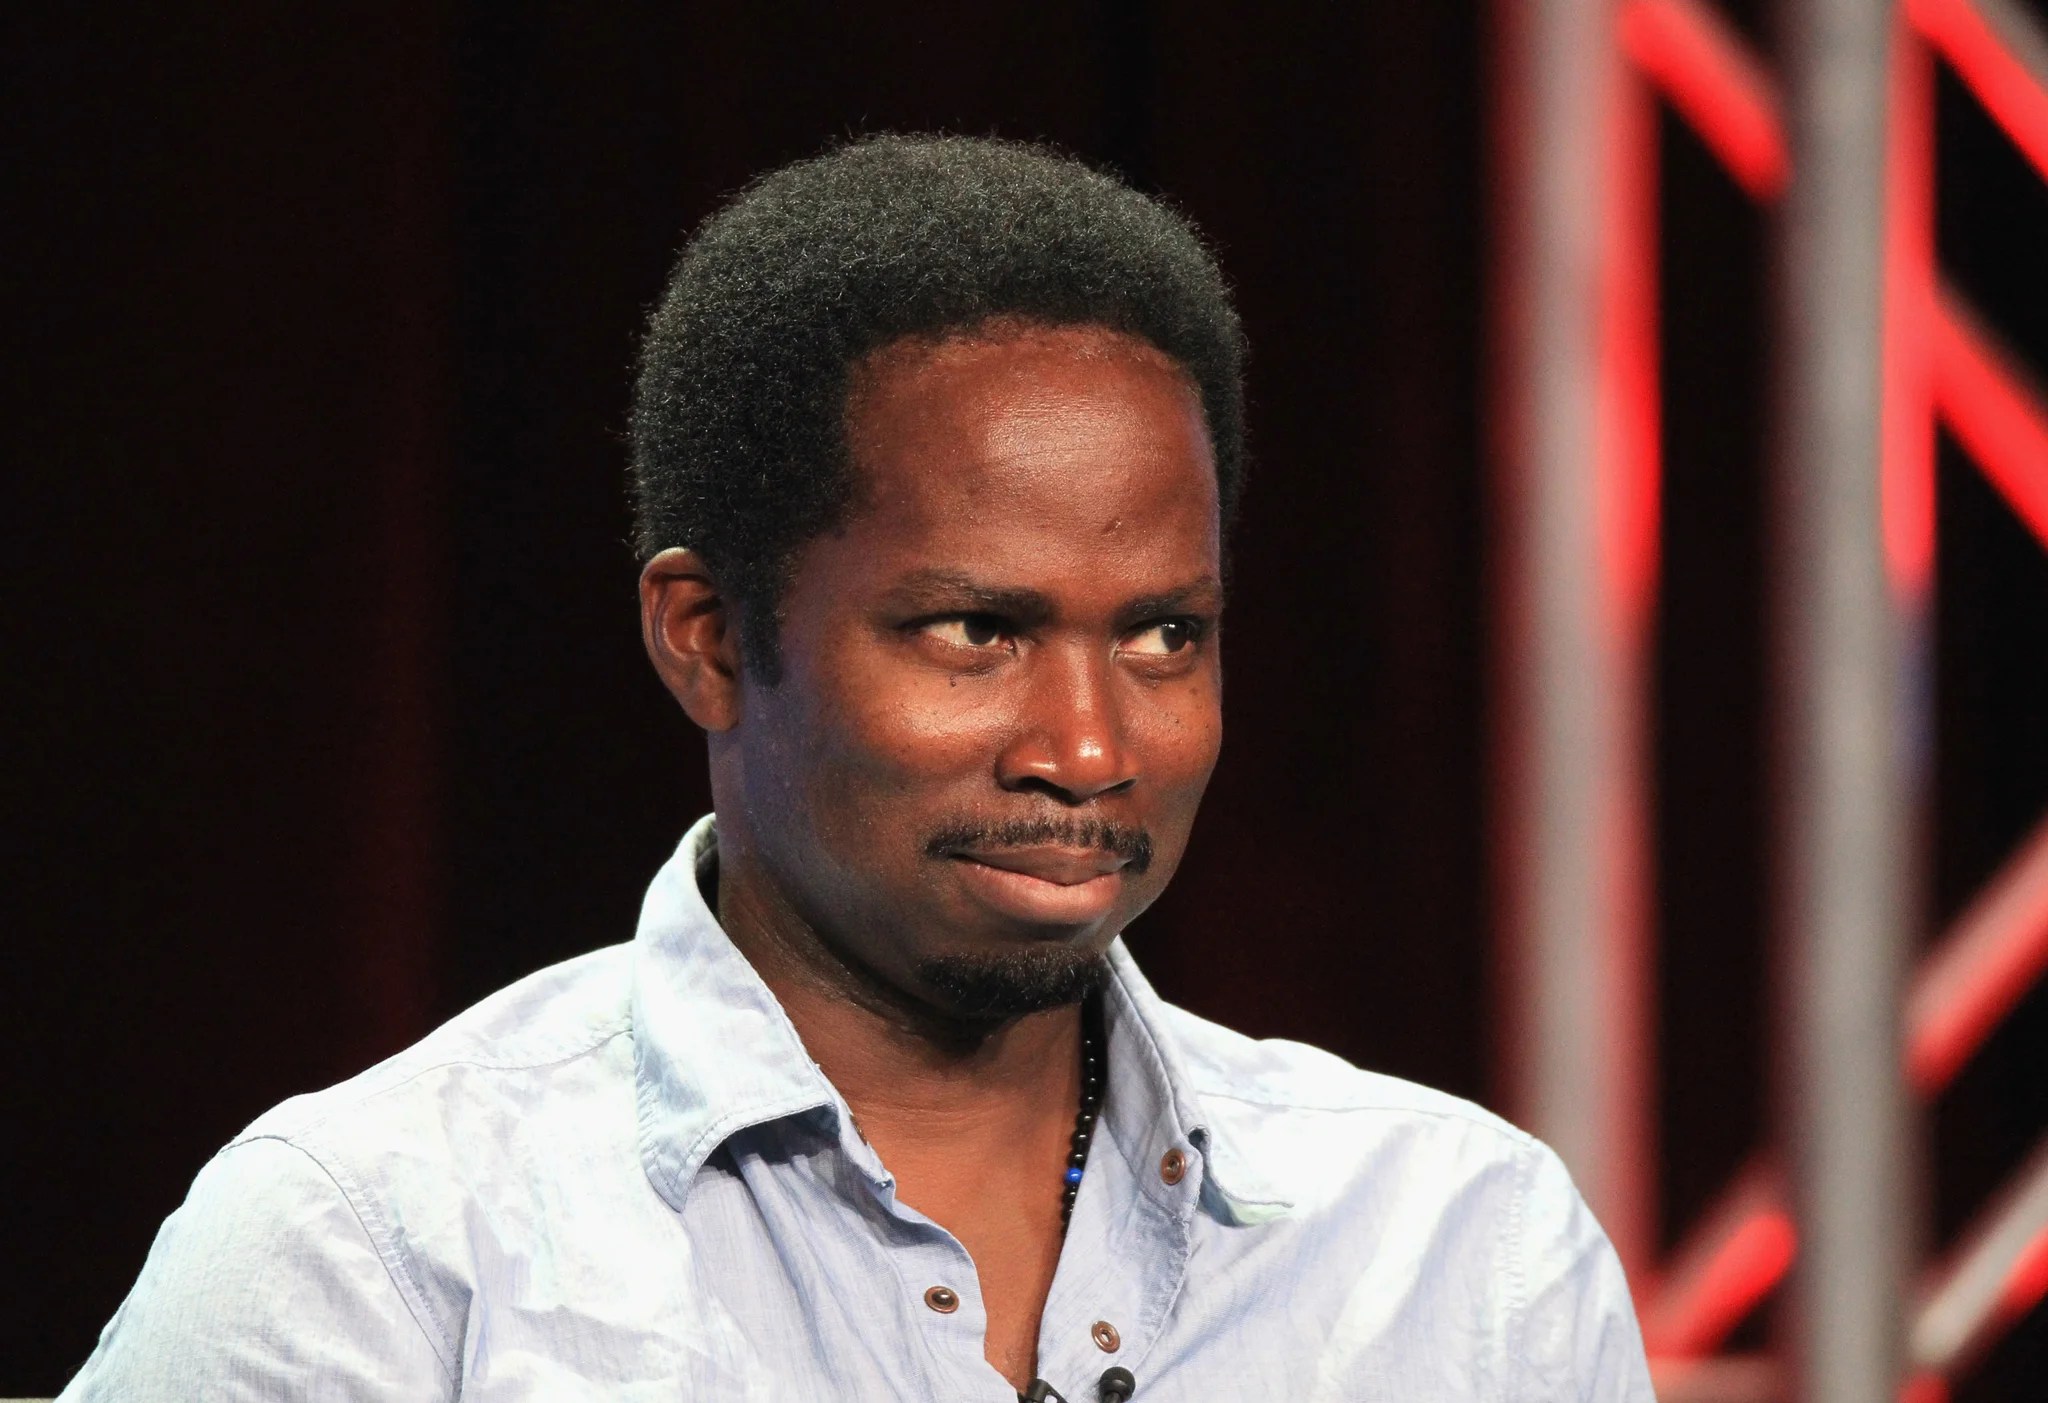 Harold Perrineau Lost had a frustrating ending, I sympathise with fans